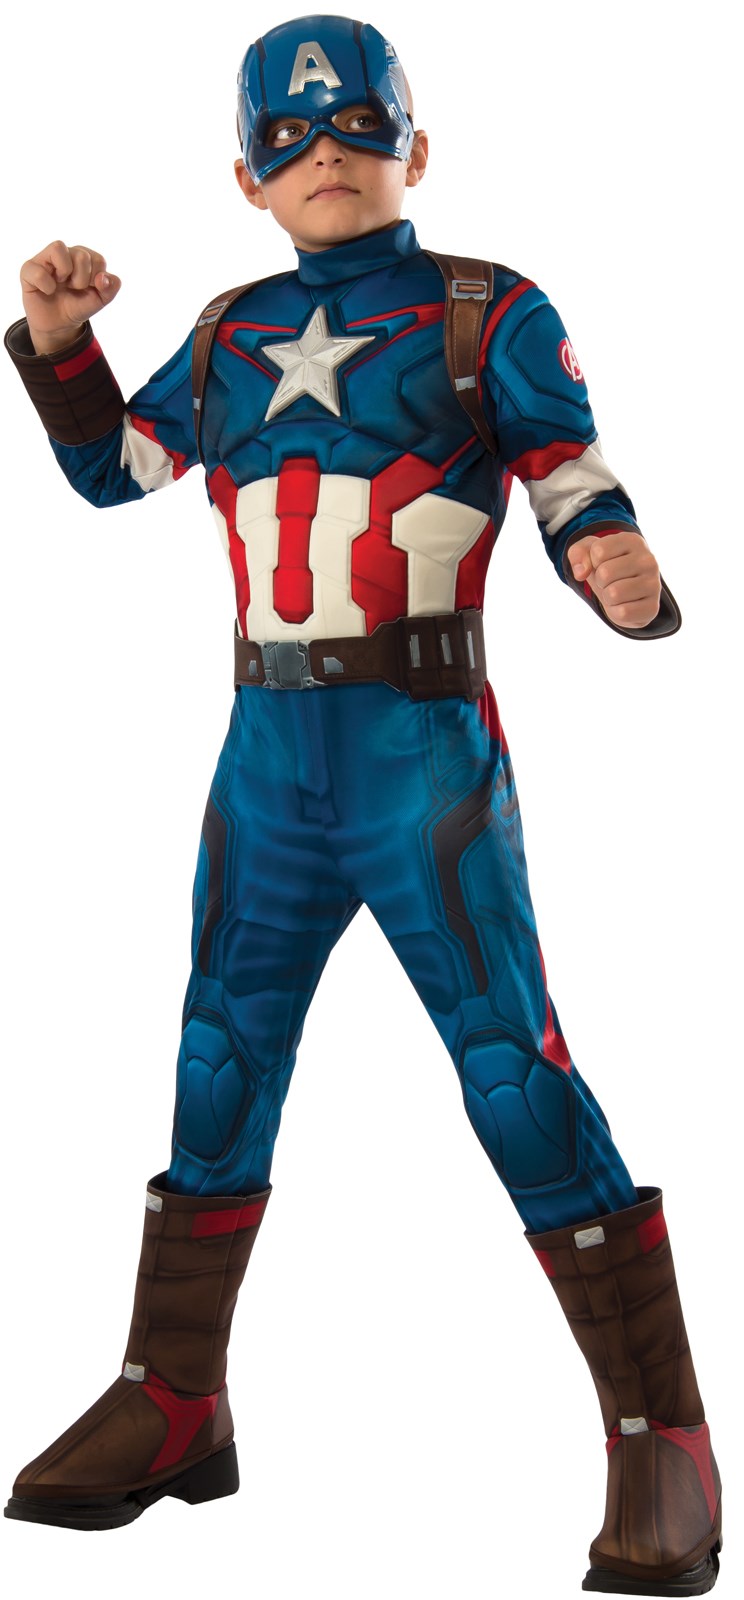 Avengers 2 - Age of Ultron: Deluxe Captain America Costume For Kids